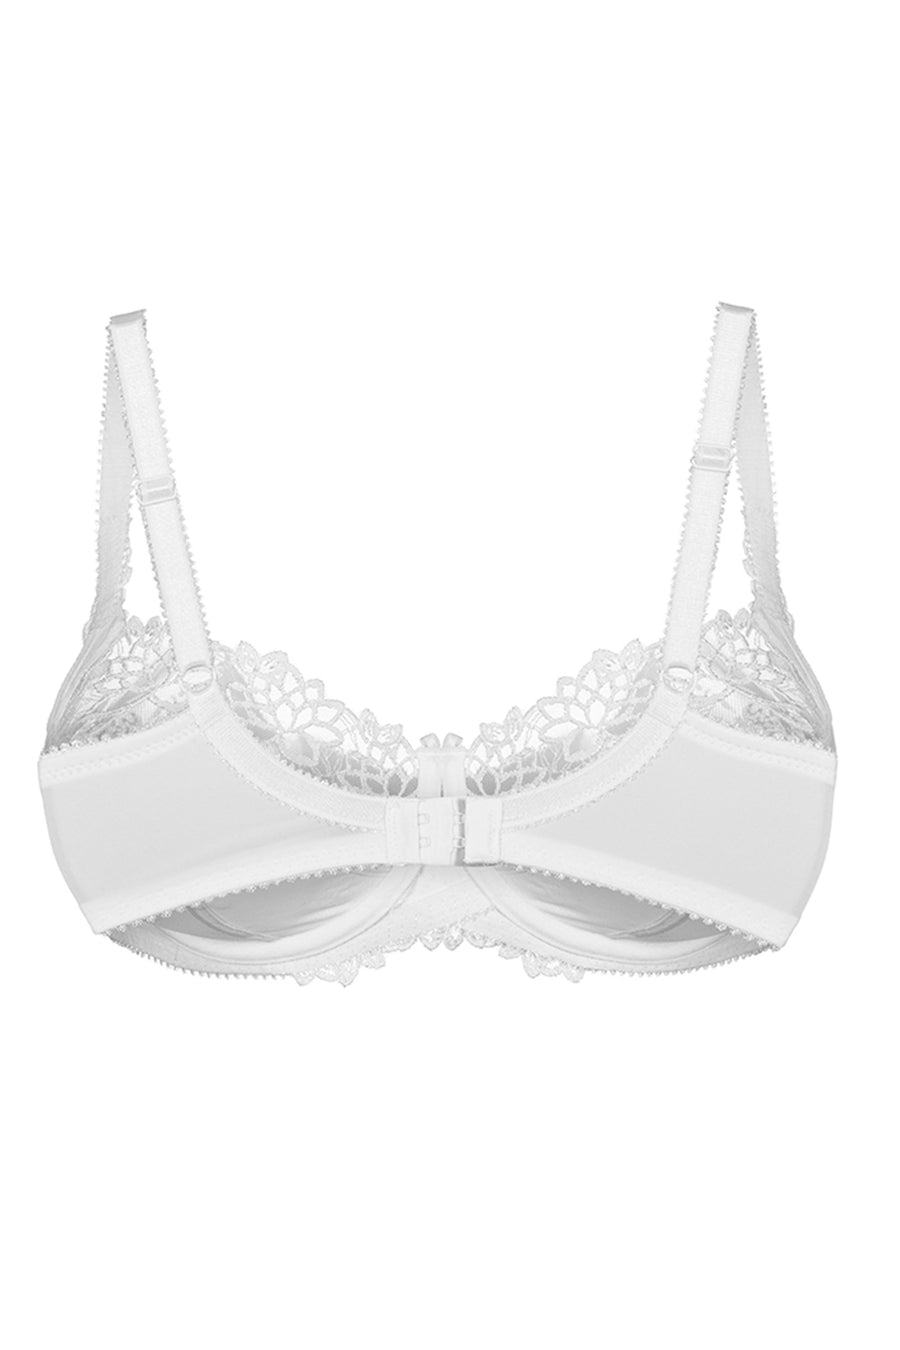 Charnos Suzette 1490040 W Underwired Balconette Bra Scarlet 30J :  : Clothing, Shoes & Accessories